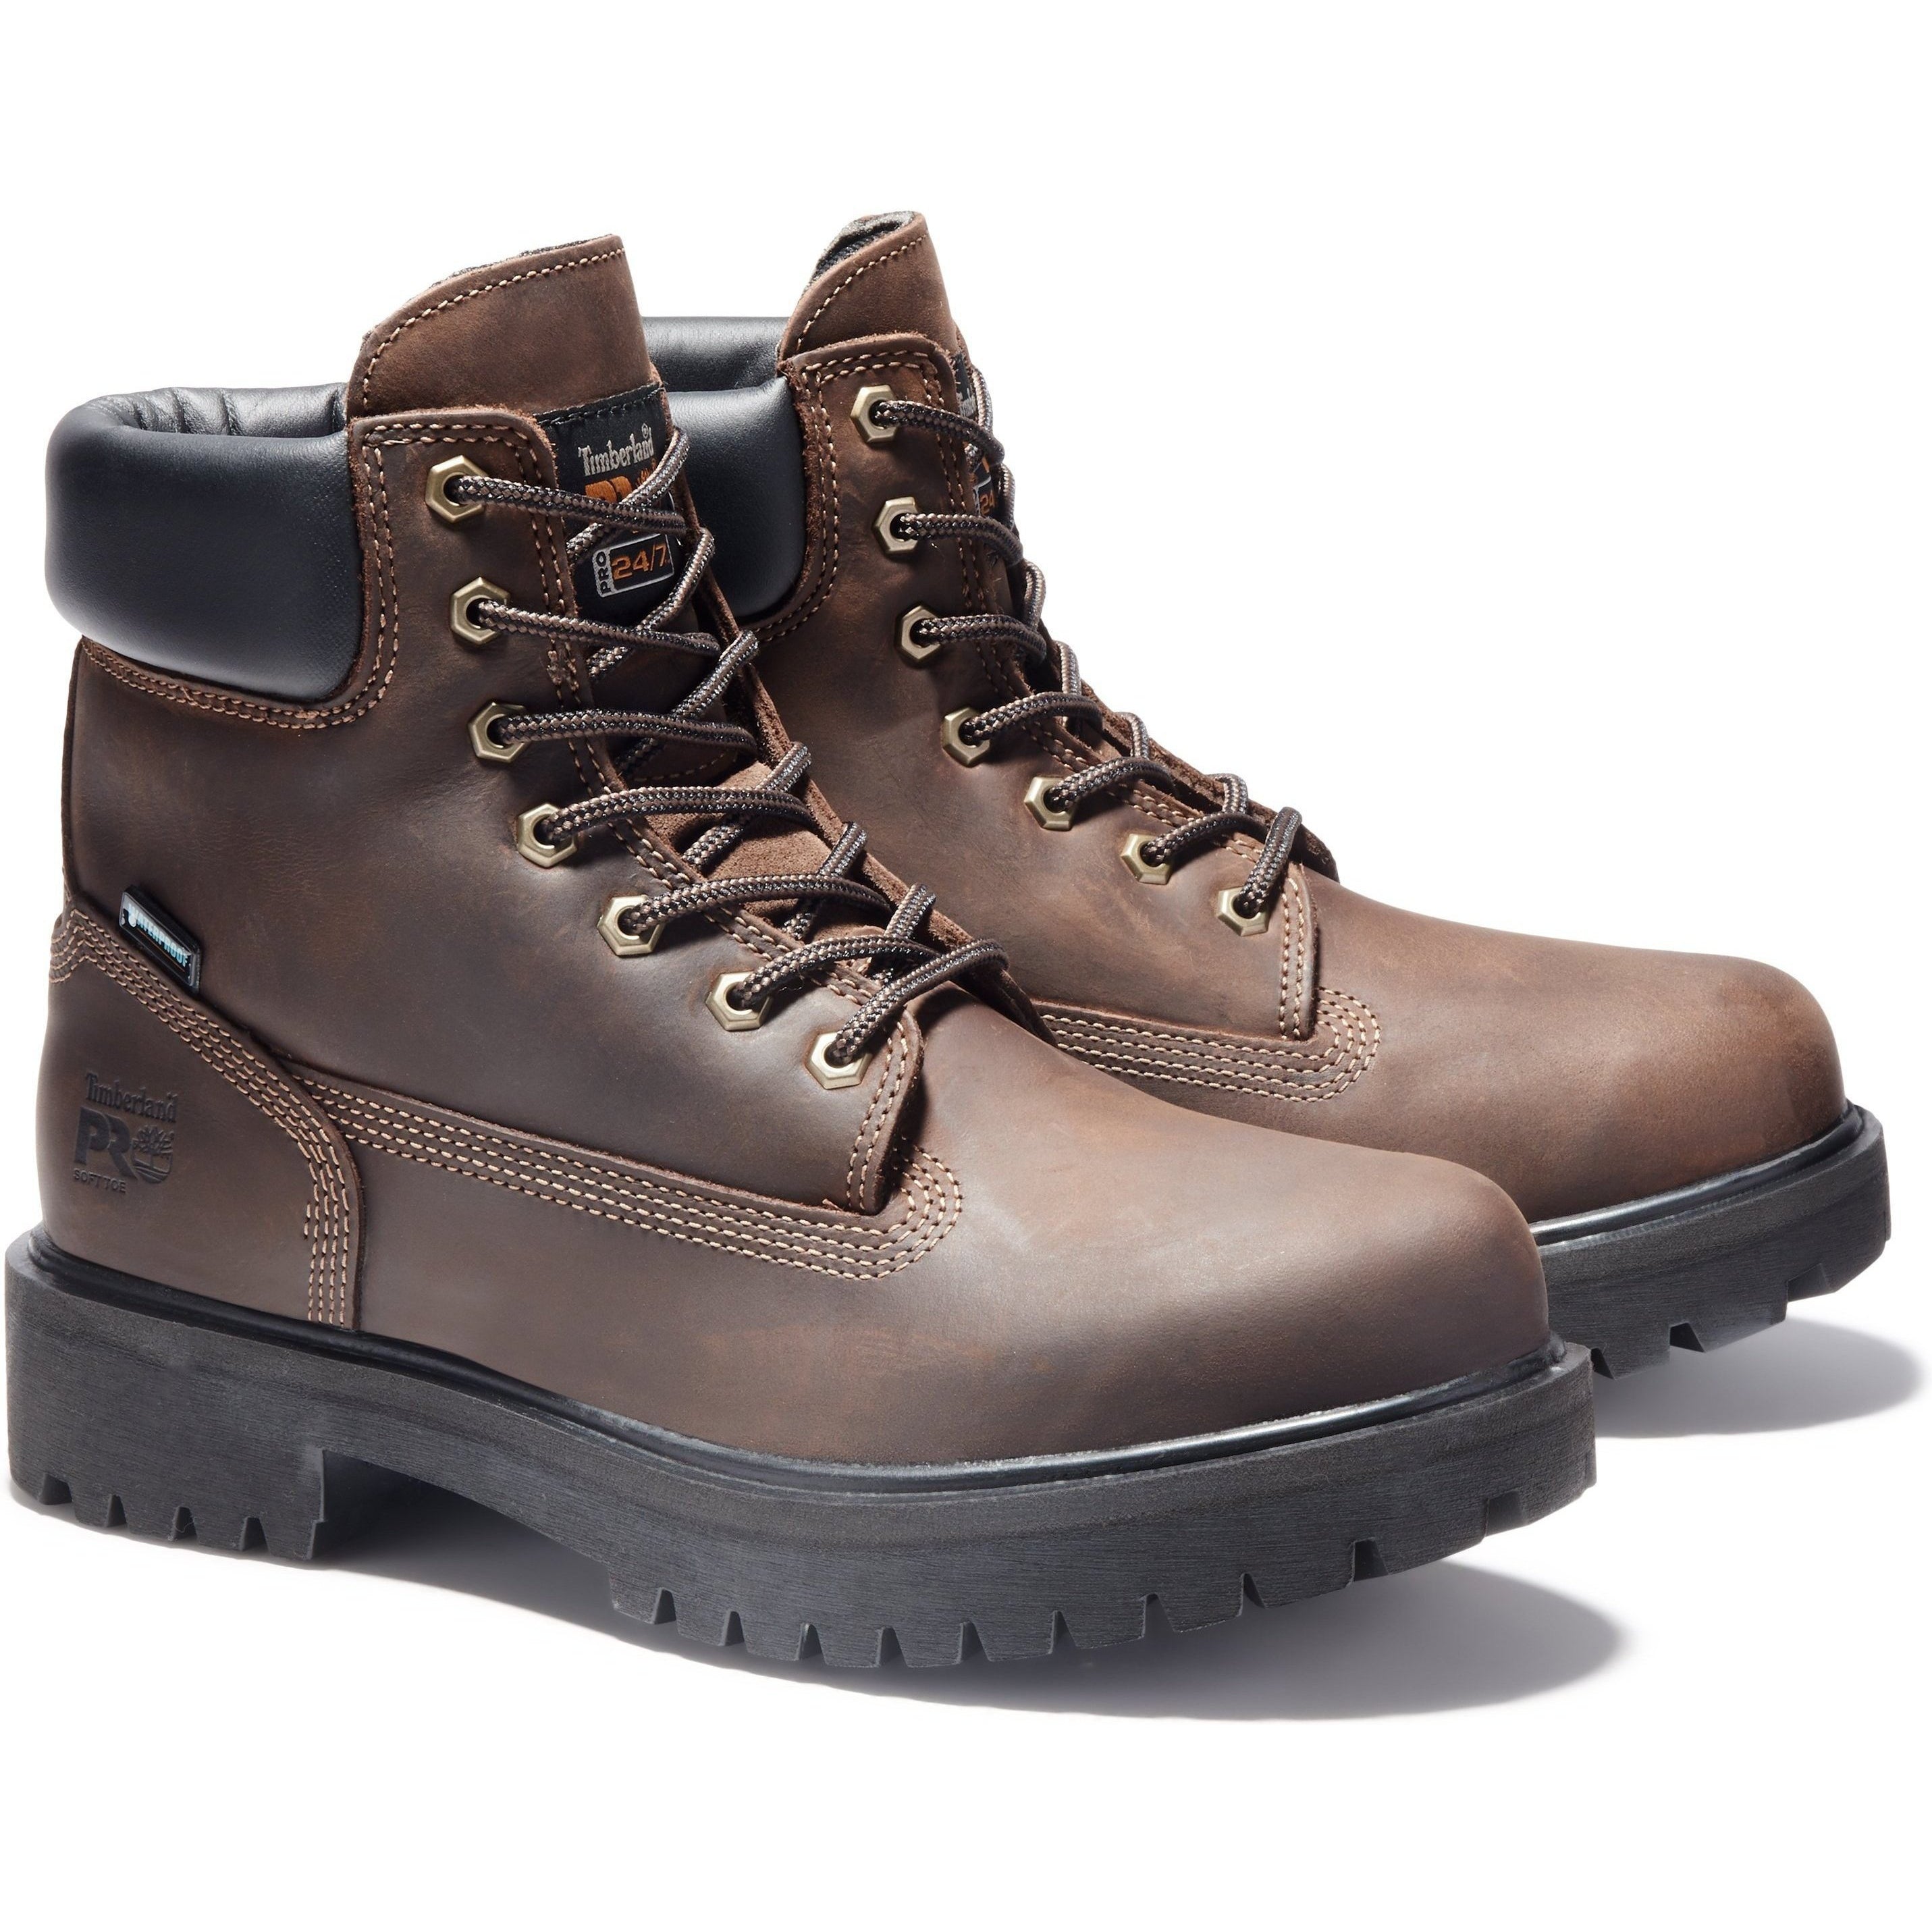 Timberland PRO Men's Direct Attach 6" WP Ins Work Boot TB038020242 7 / Medium / Brown Oiled Full Grain - Overlook Boots